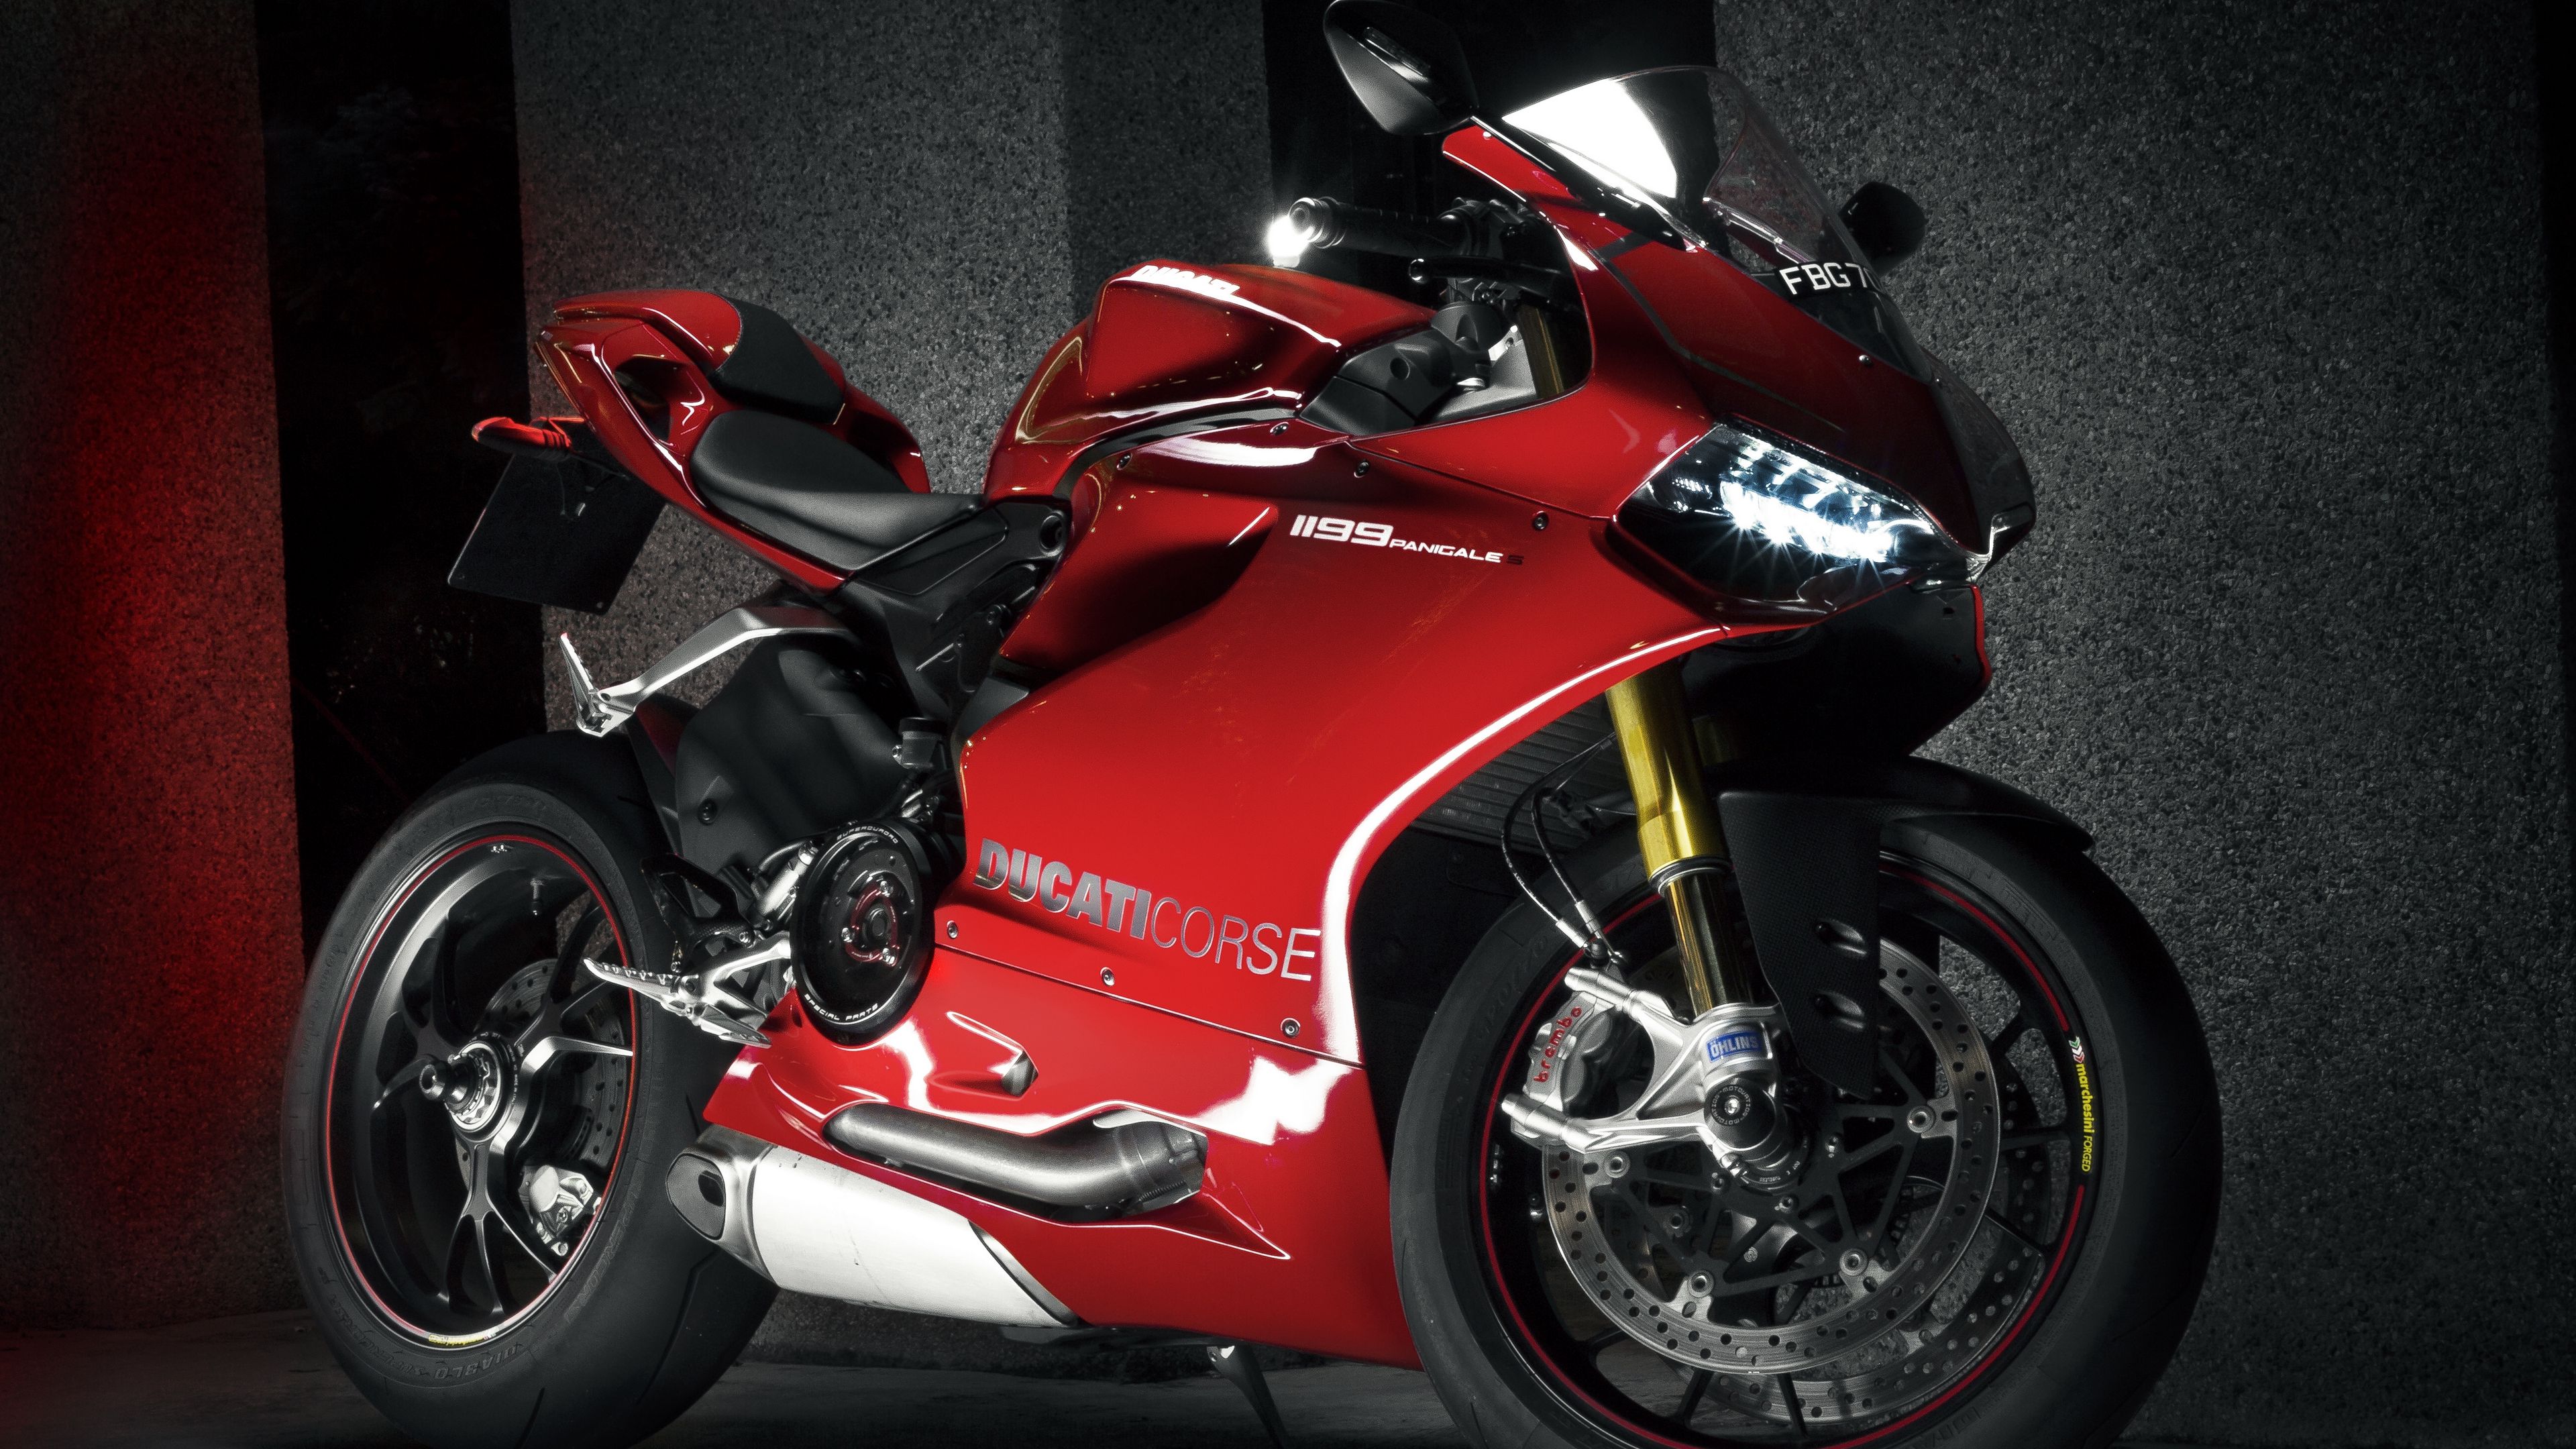 Ducati k wallpapers for your desktop or mobile screen free and easy to download